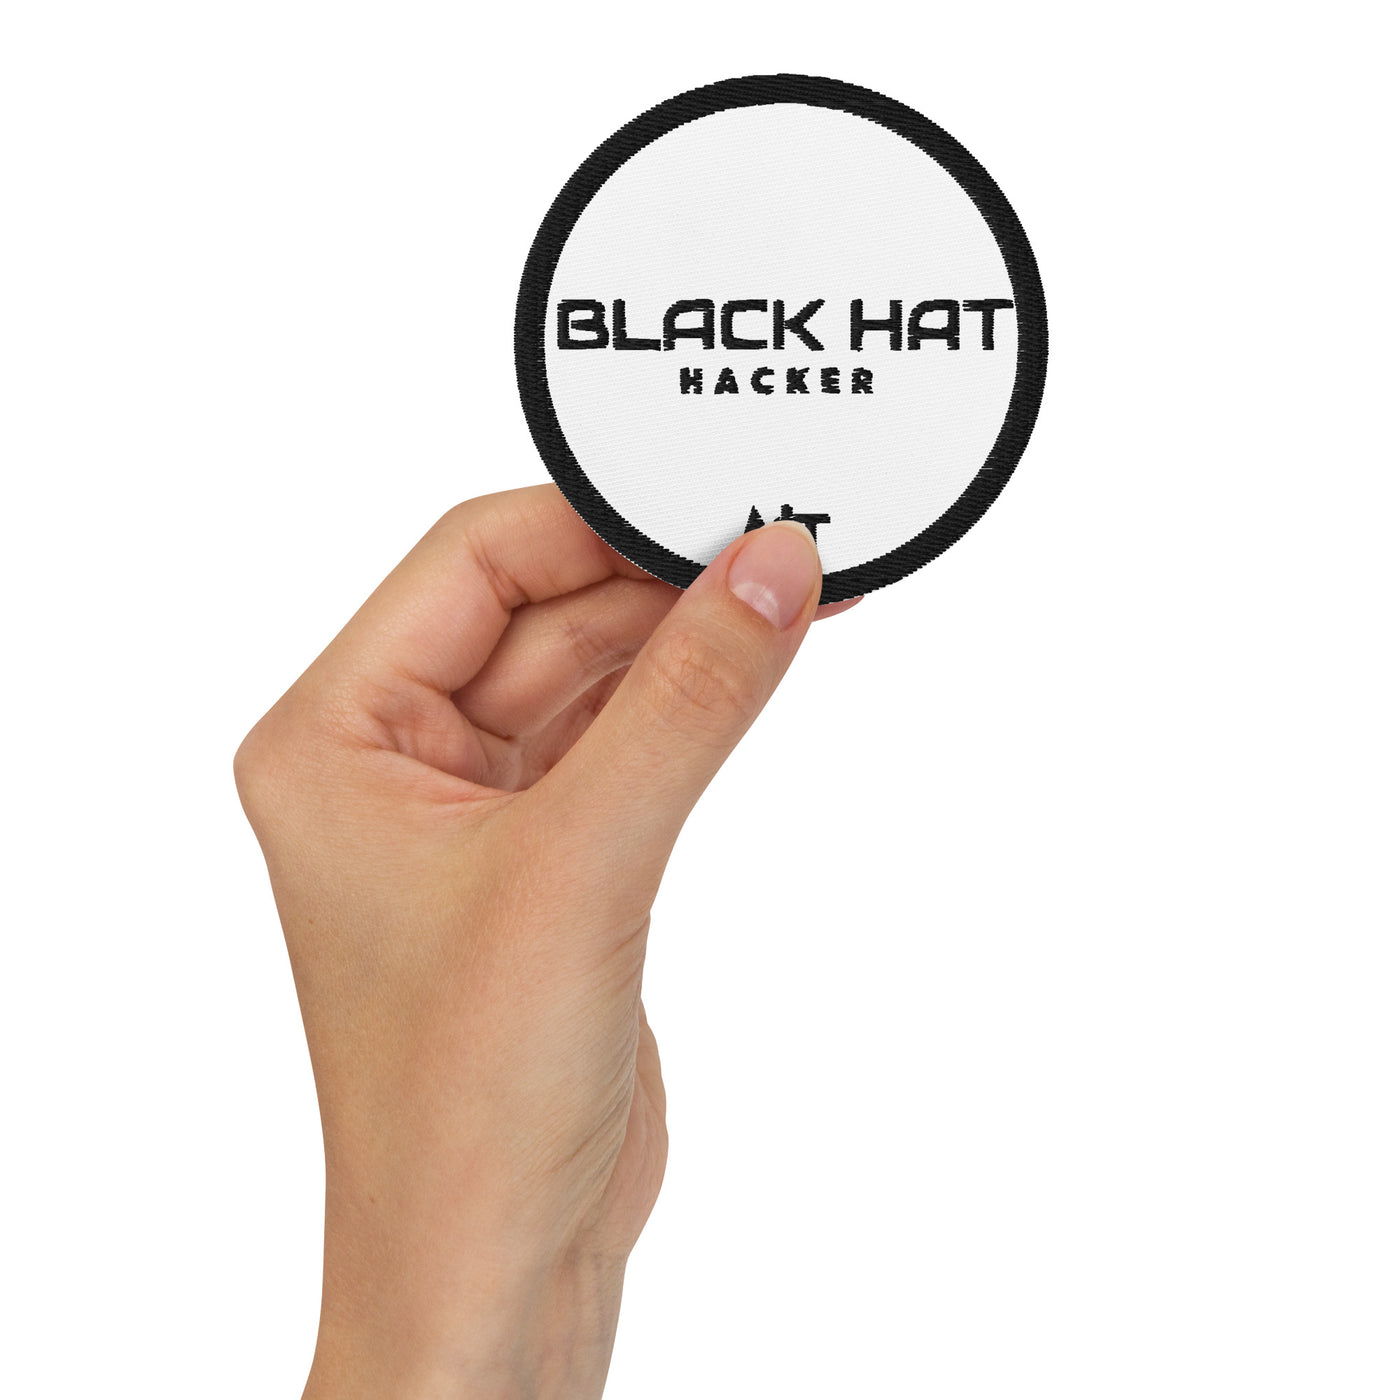 Black Hat Hacker V17 - Embroidered patches